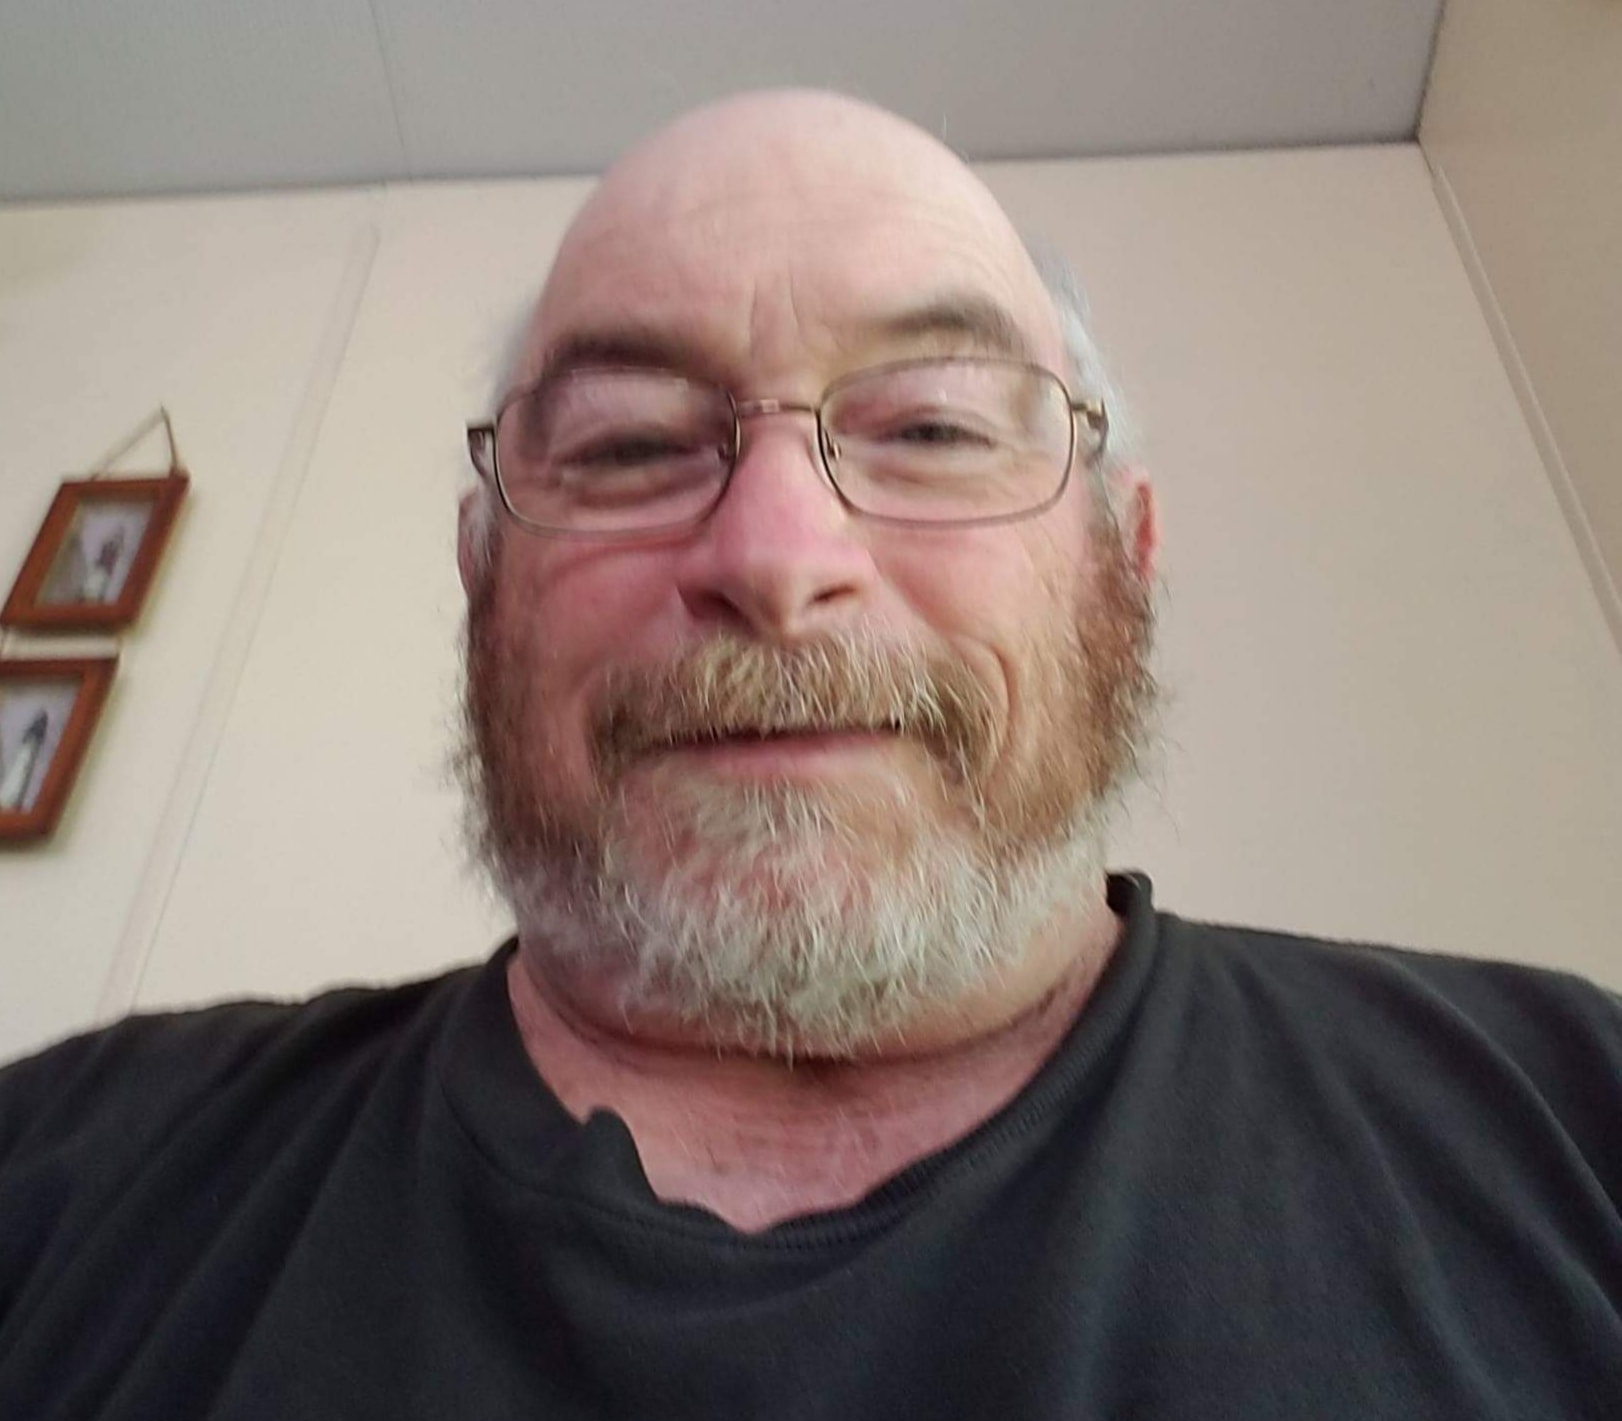 Fire department searchers: Body found is 'Buckie' Barlow, missing since ...